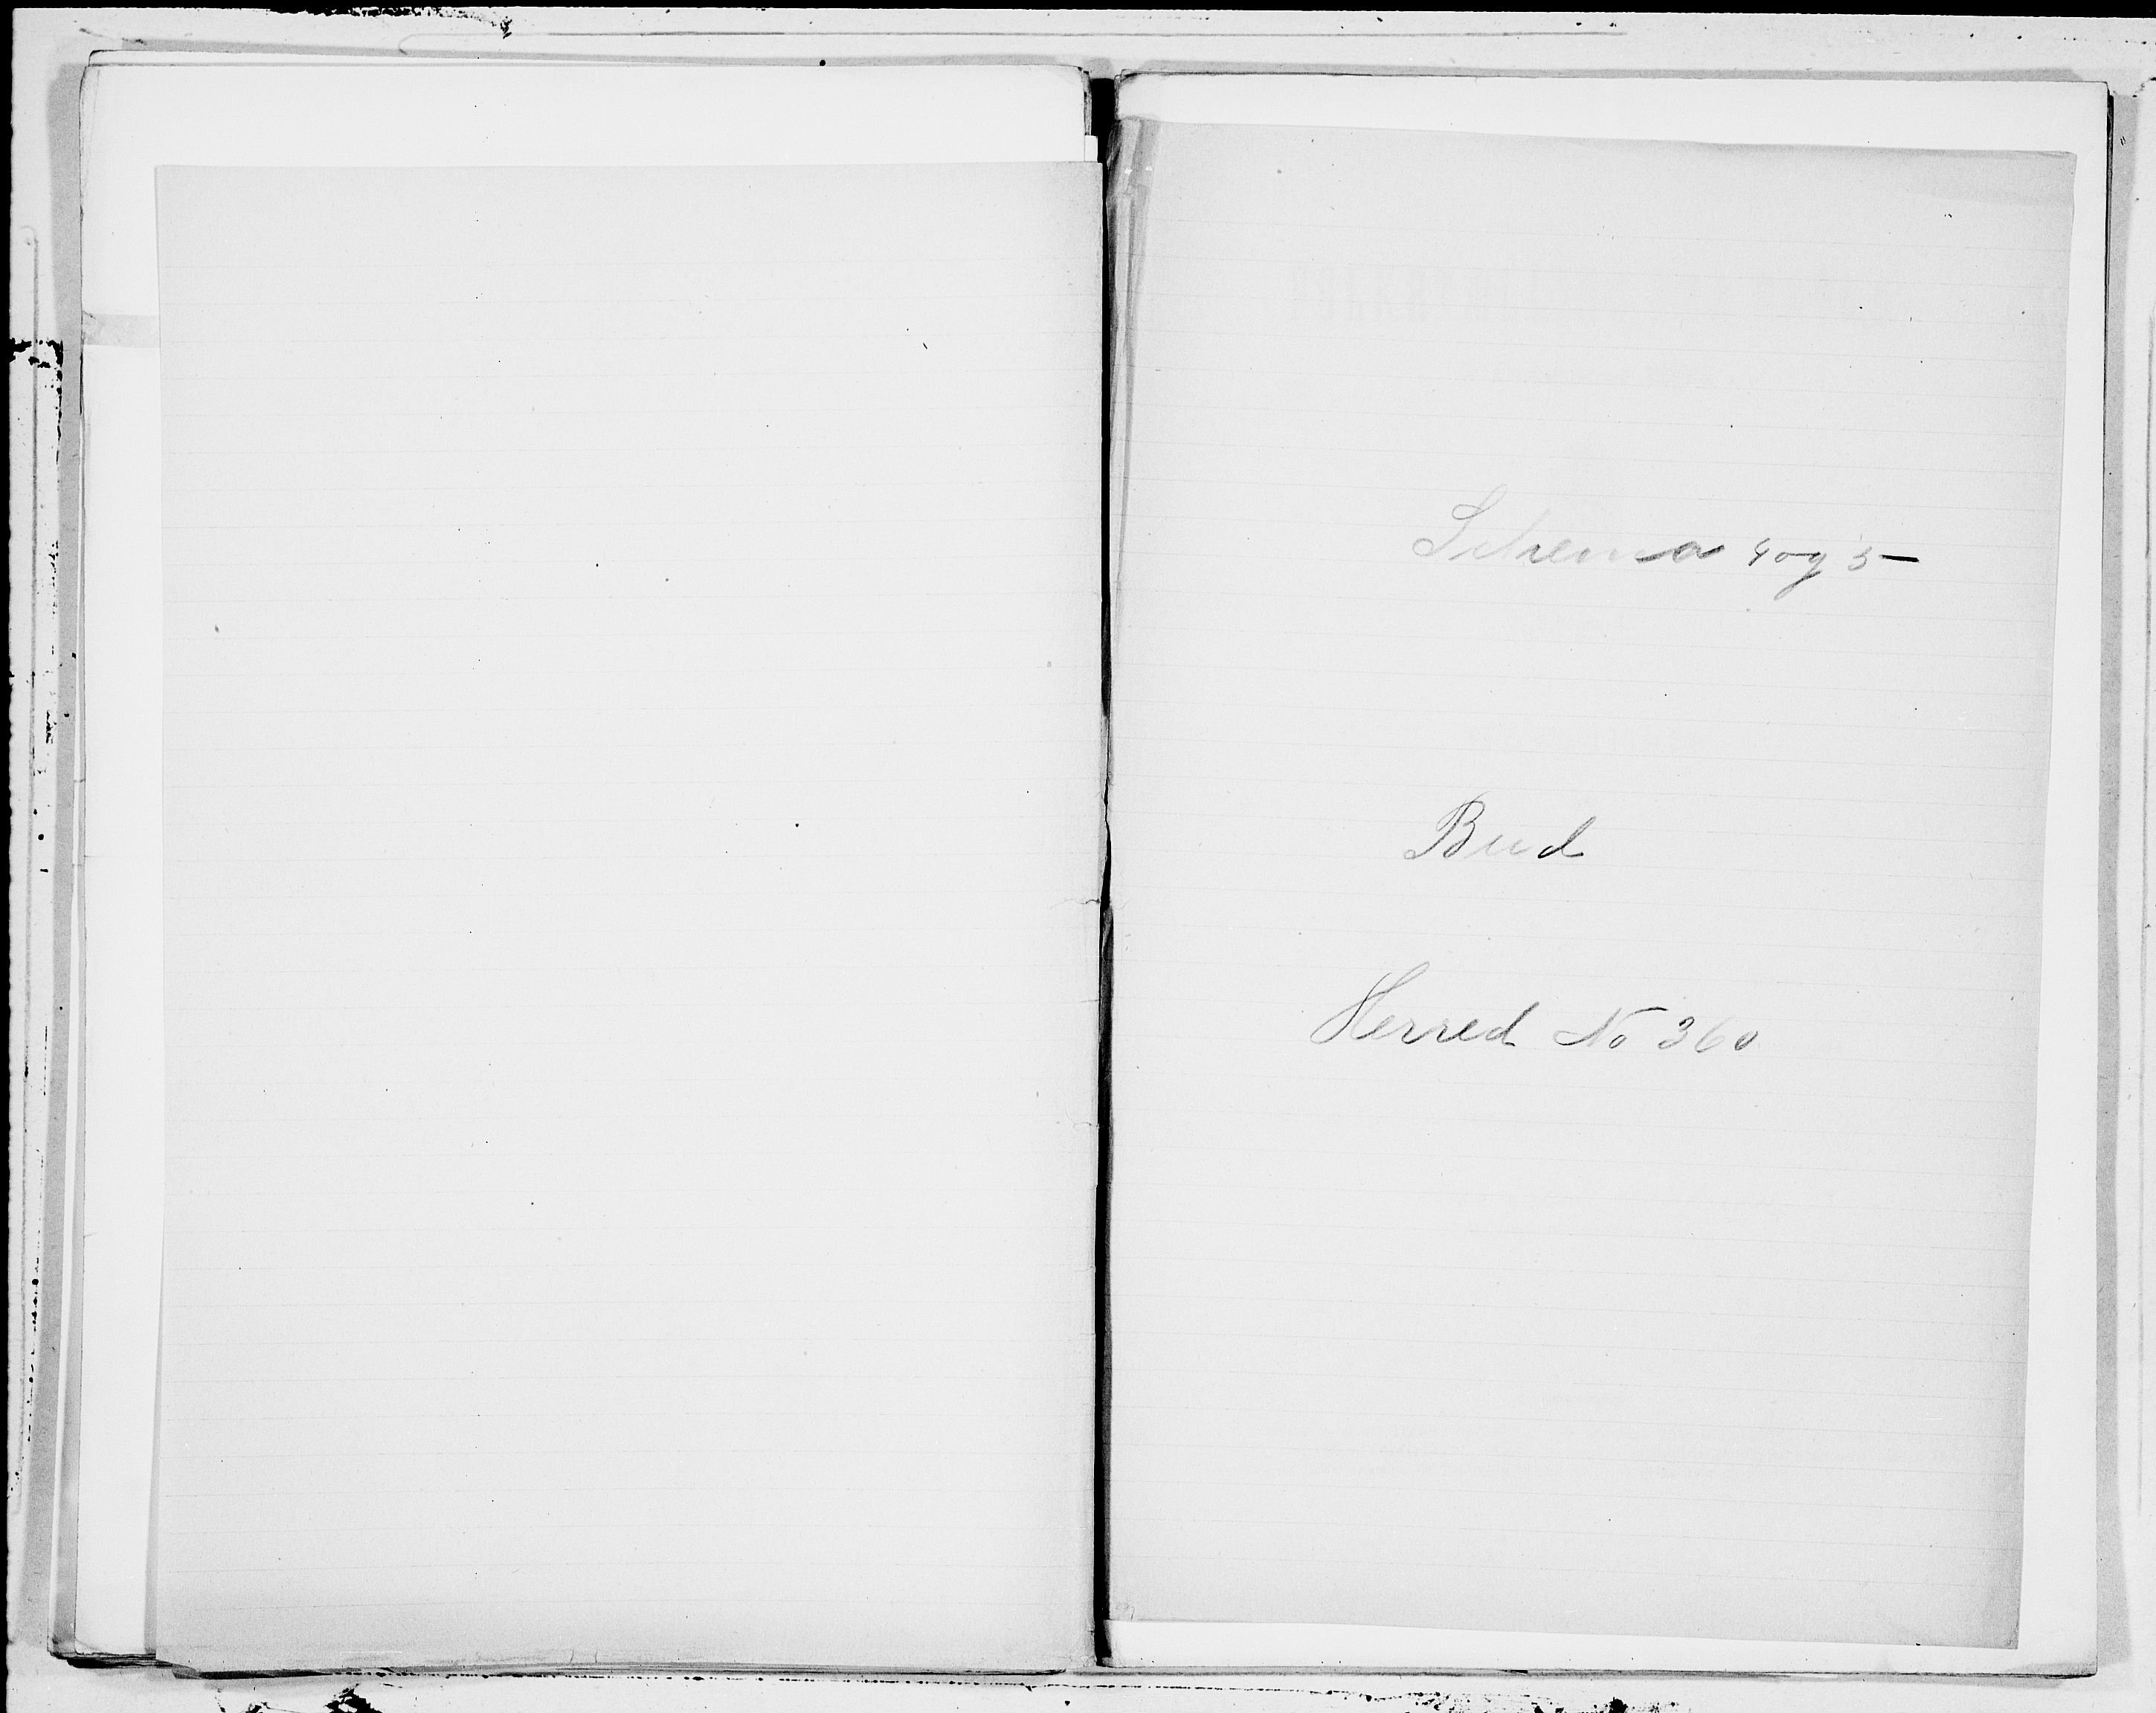 SAT, 1900 census for Bud, 1900, p. 1